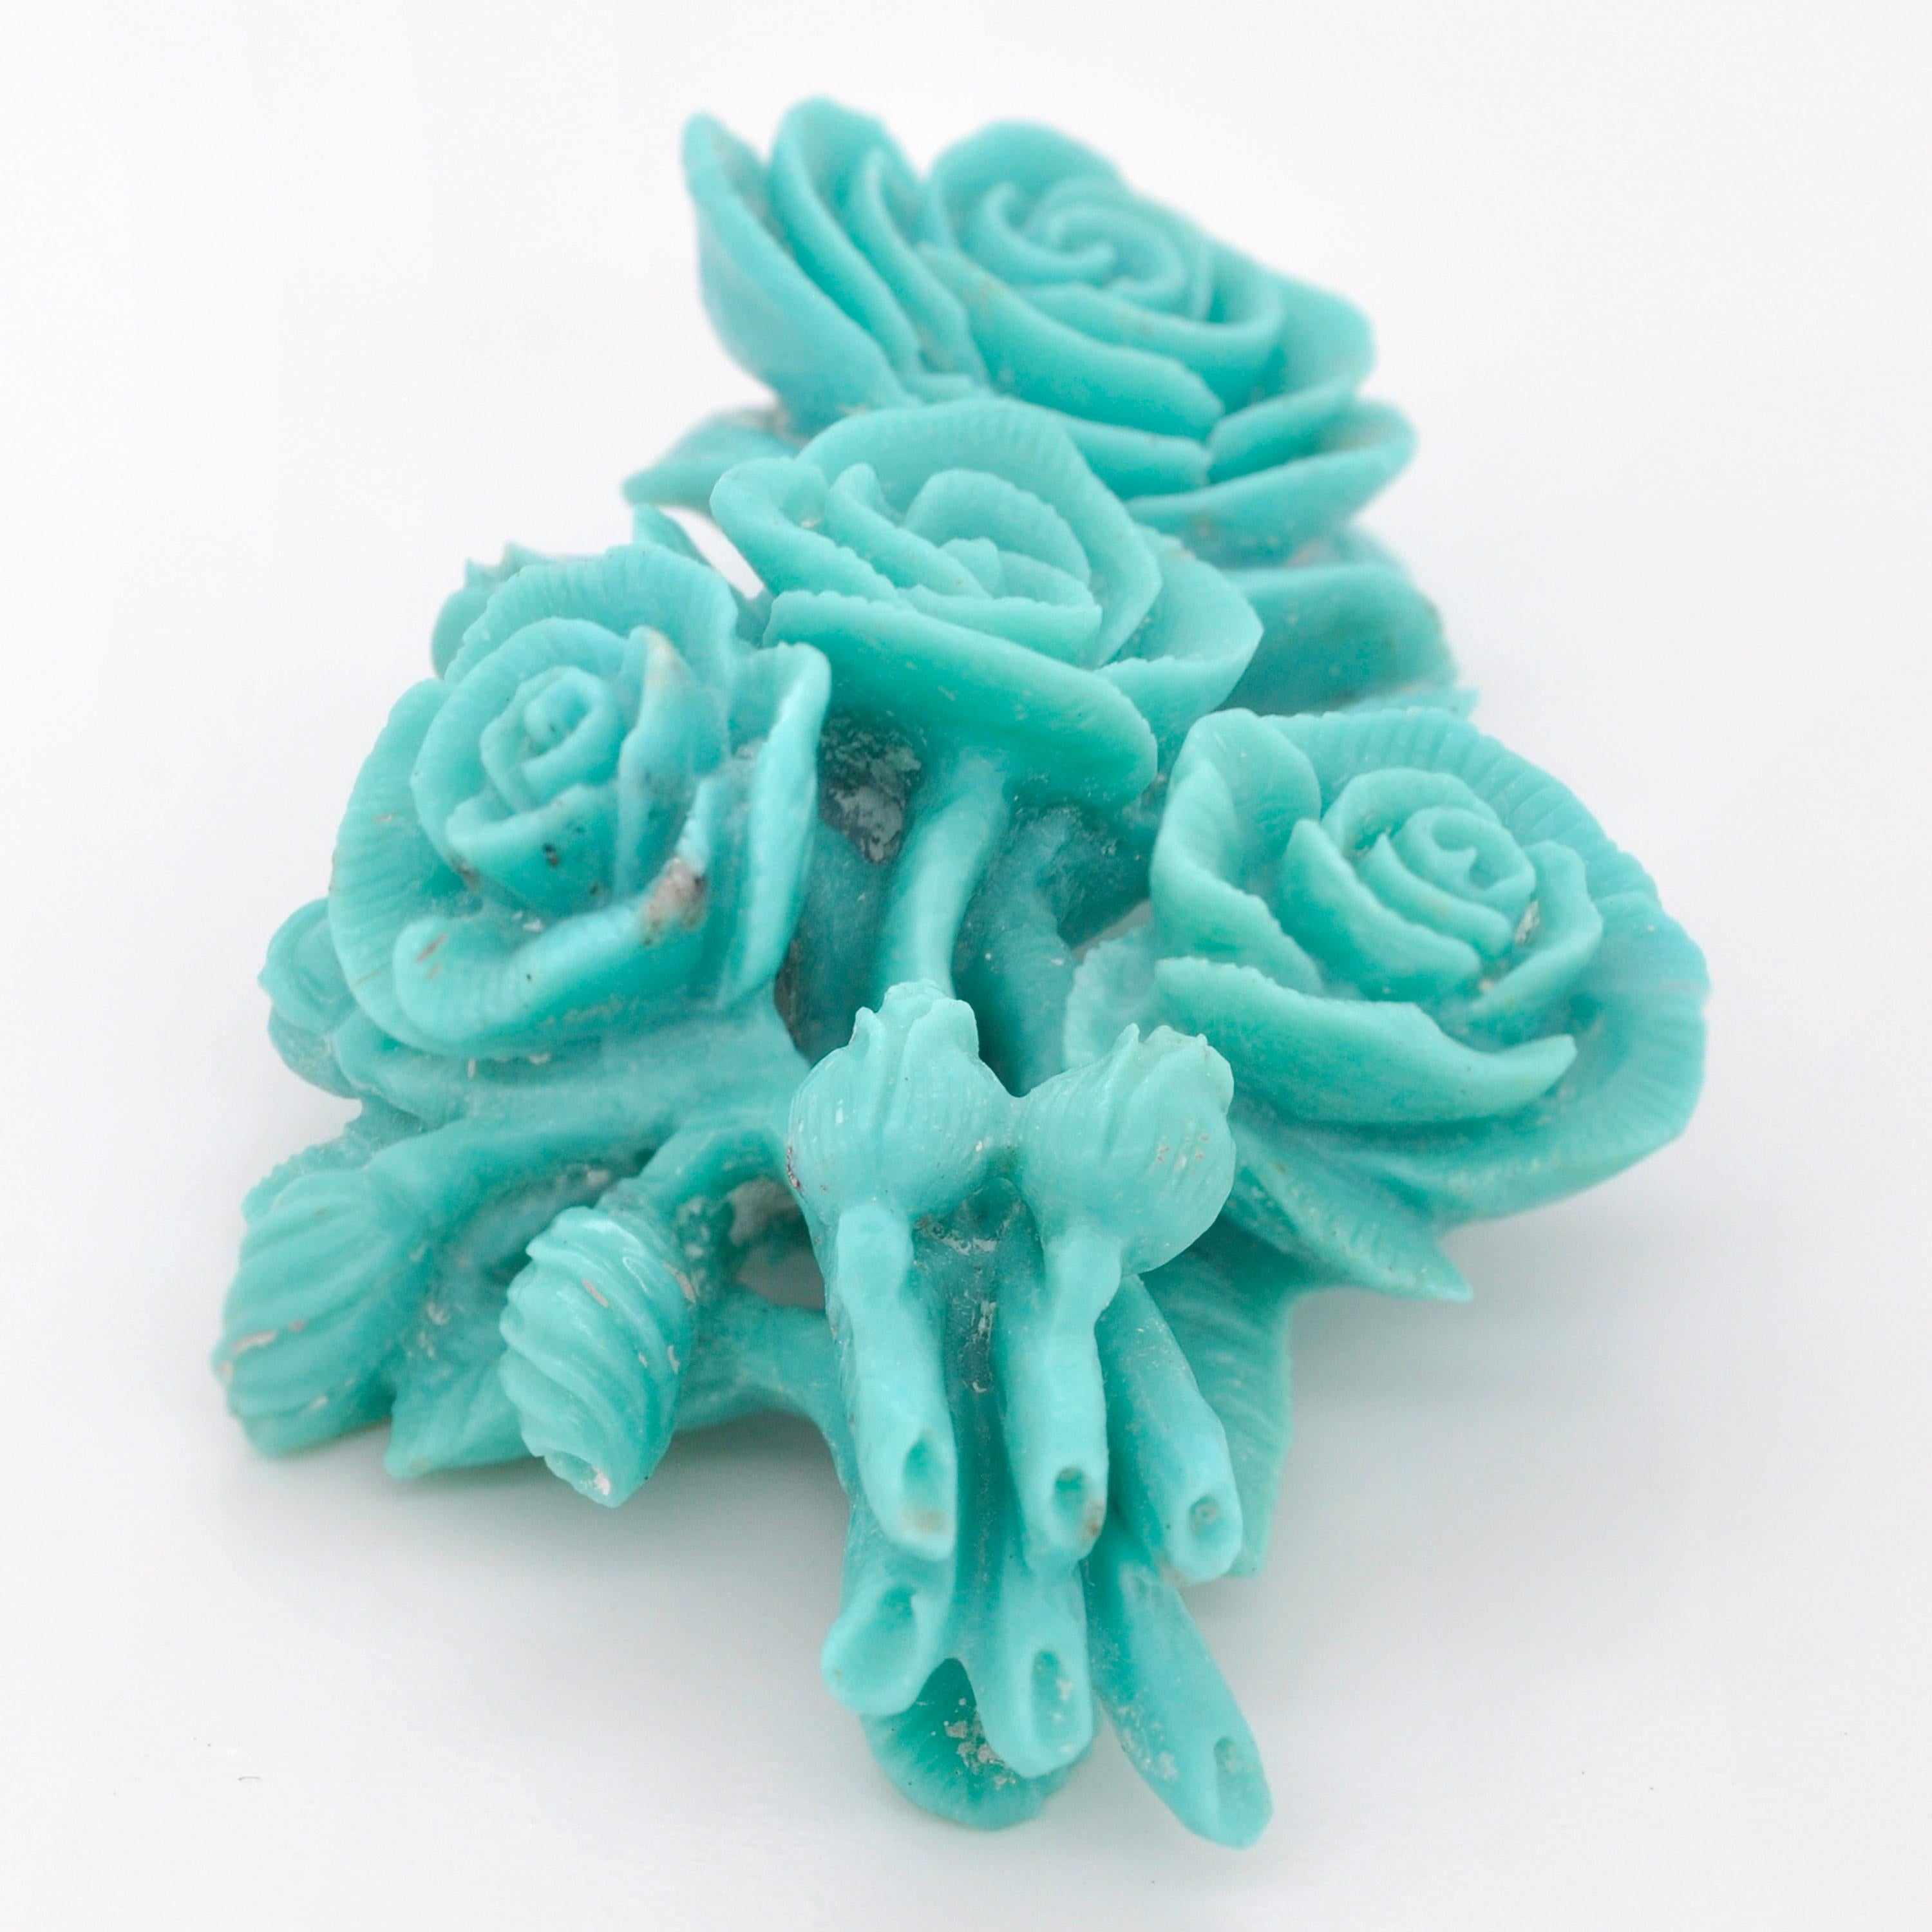 Contemporary Hand-Carved 54.41 Carats Natural Arizona Turquoise Bouquet Loose Gemstone For Sale